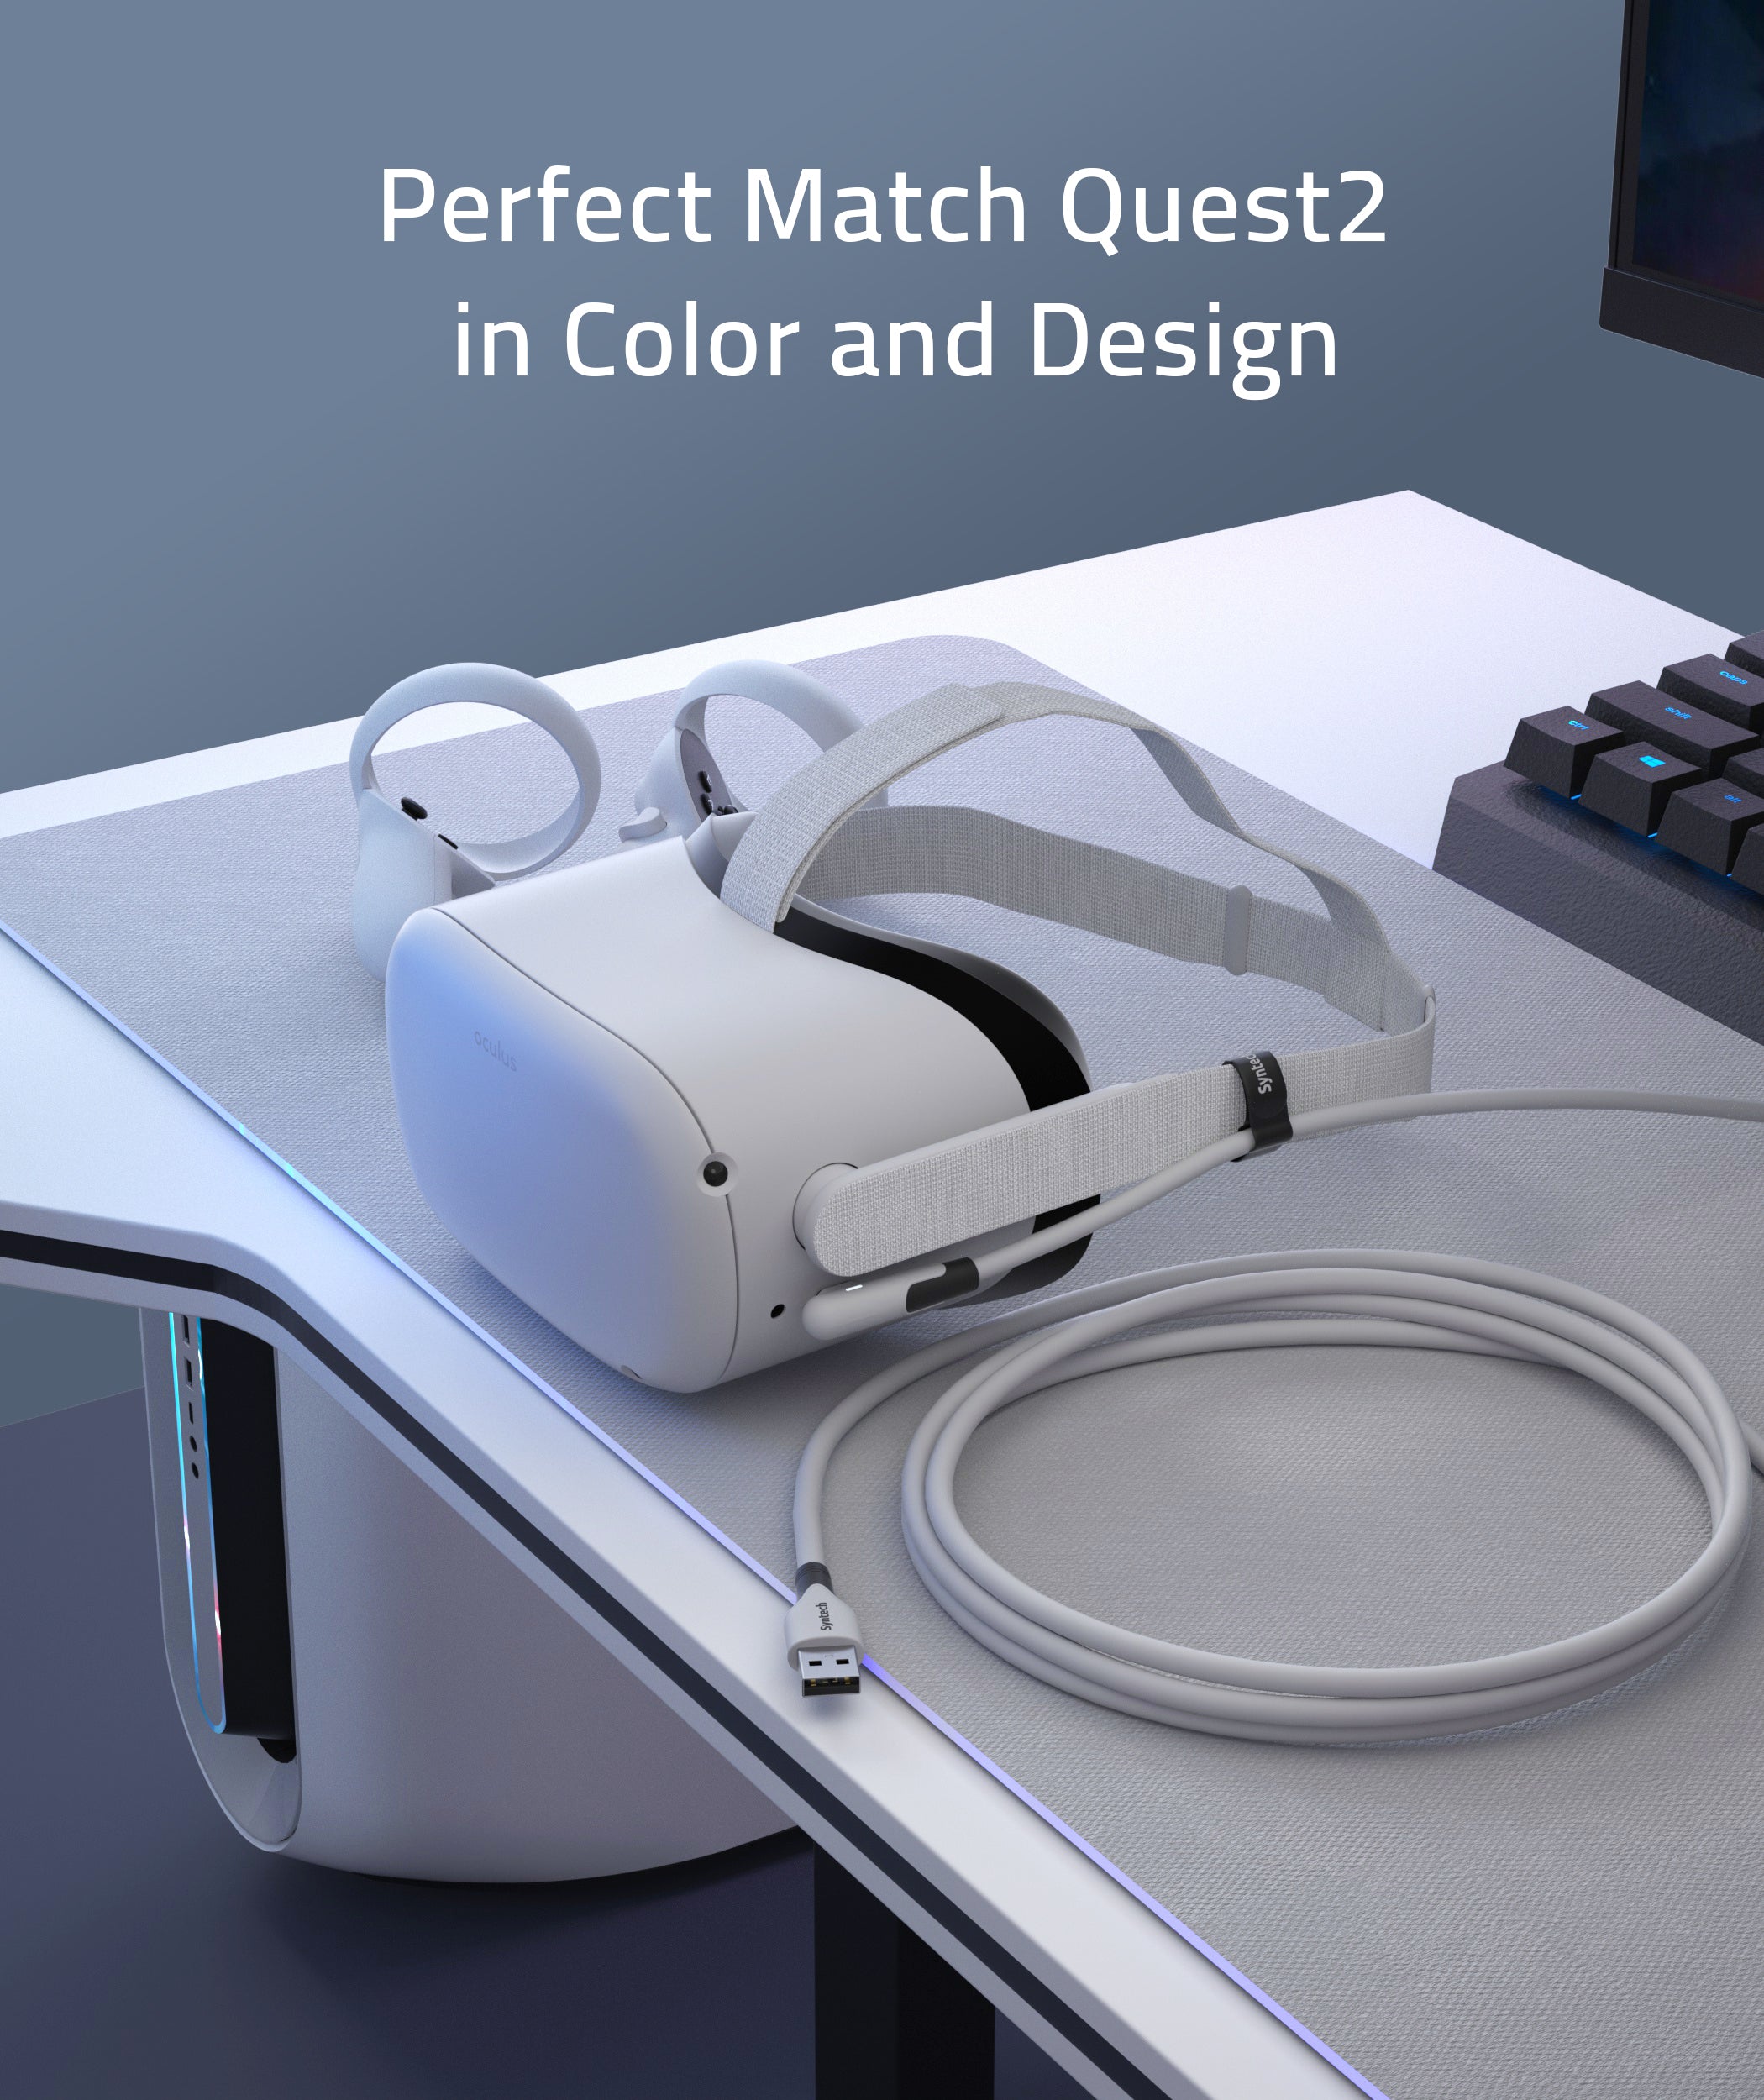 Link Cable a perfect quest 2 match